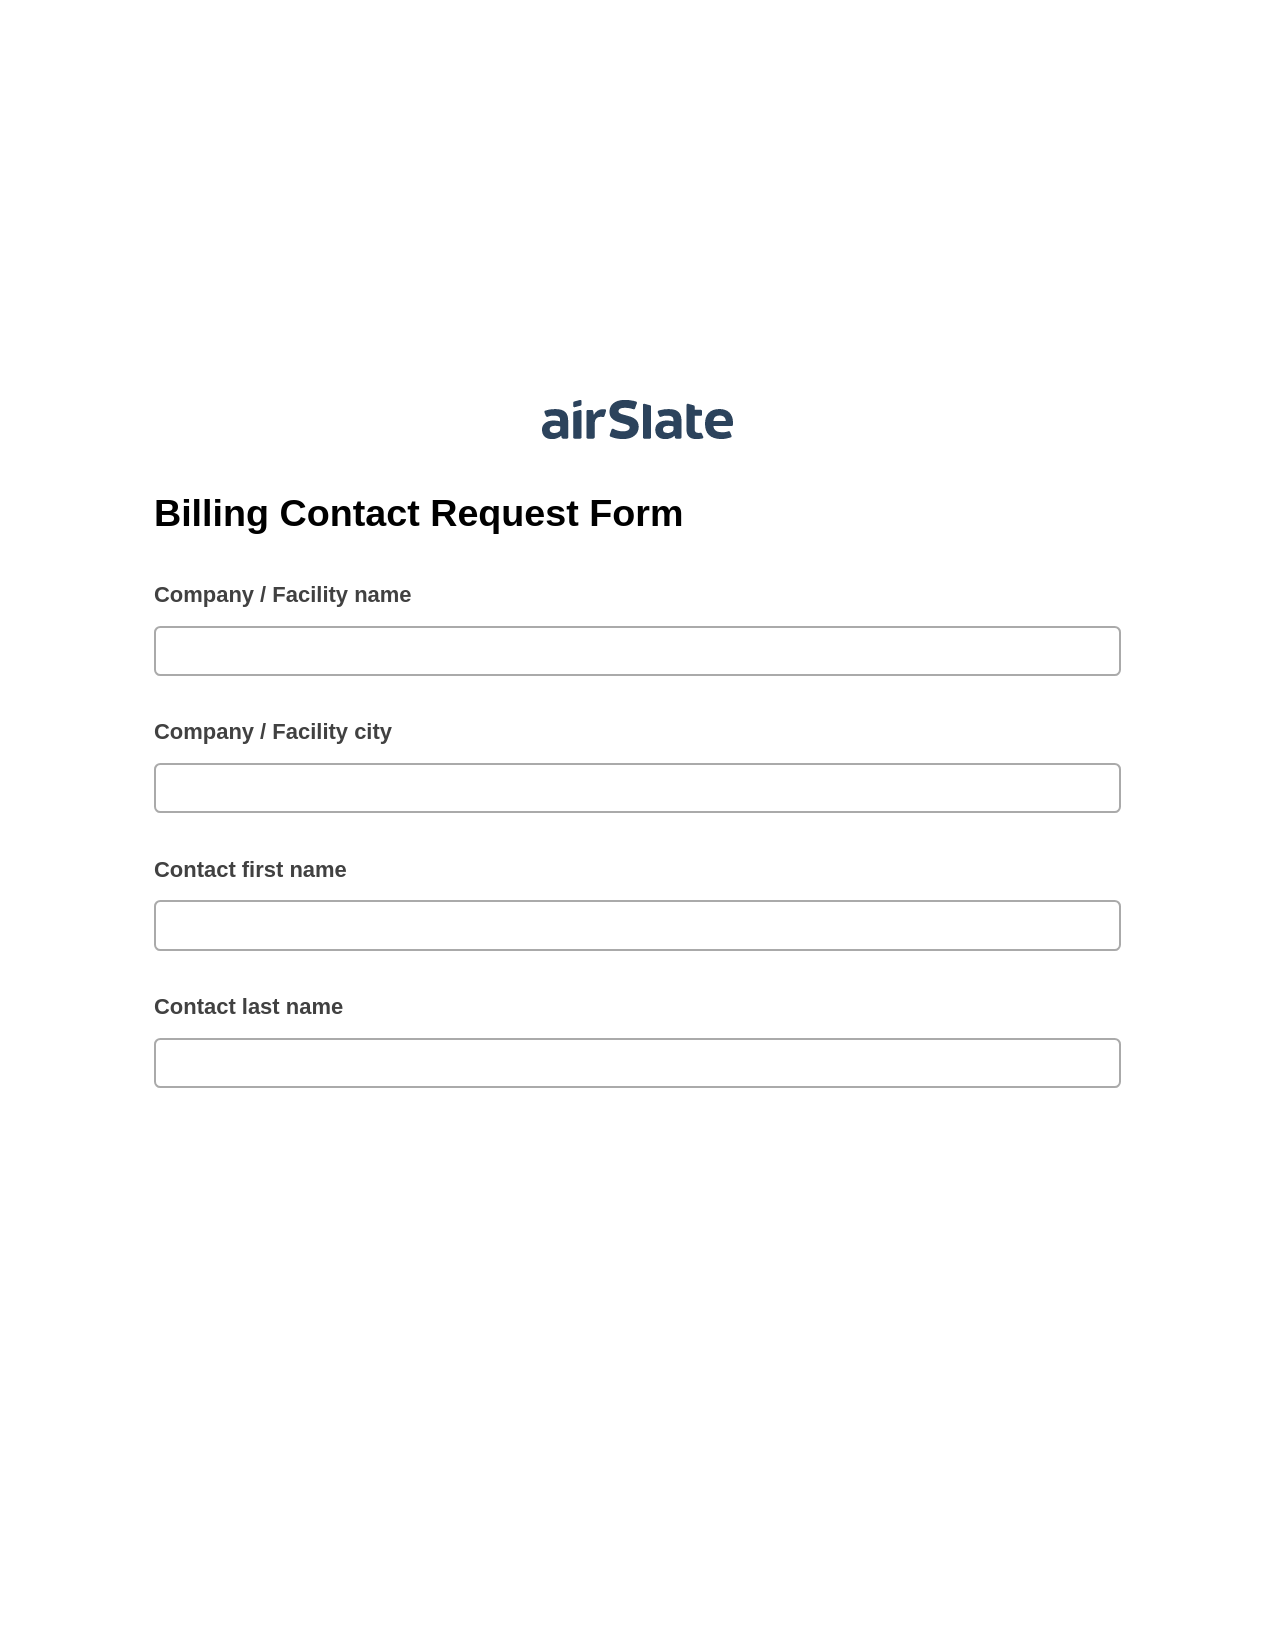 Multirole Billing Contact Request Form Pre-fill Document Bot, System Bot - Create a Slate in another Flow, Box Bot